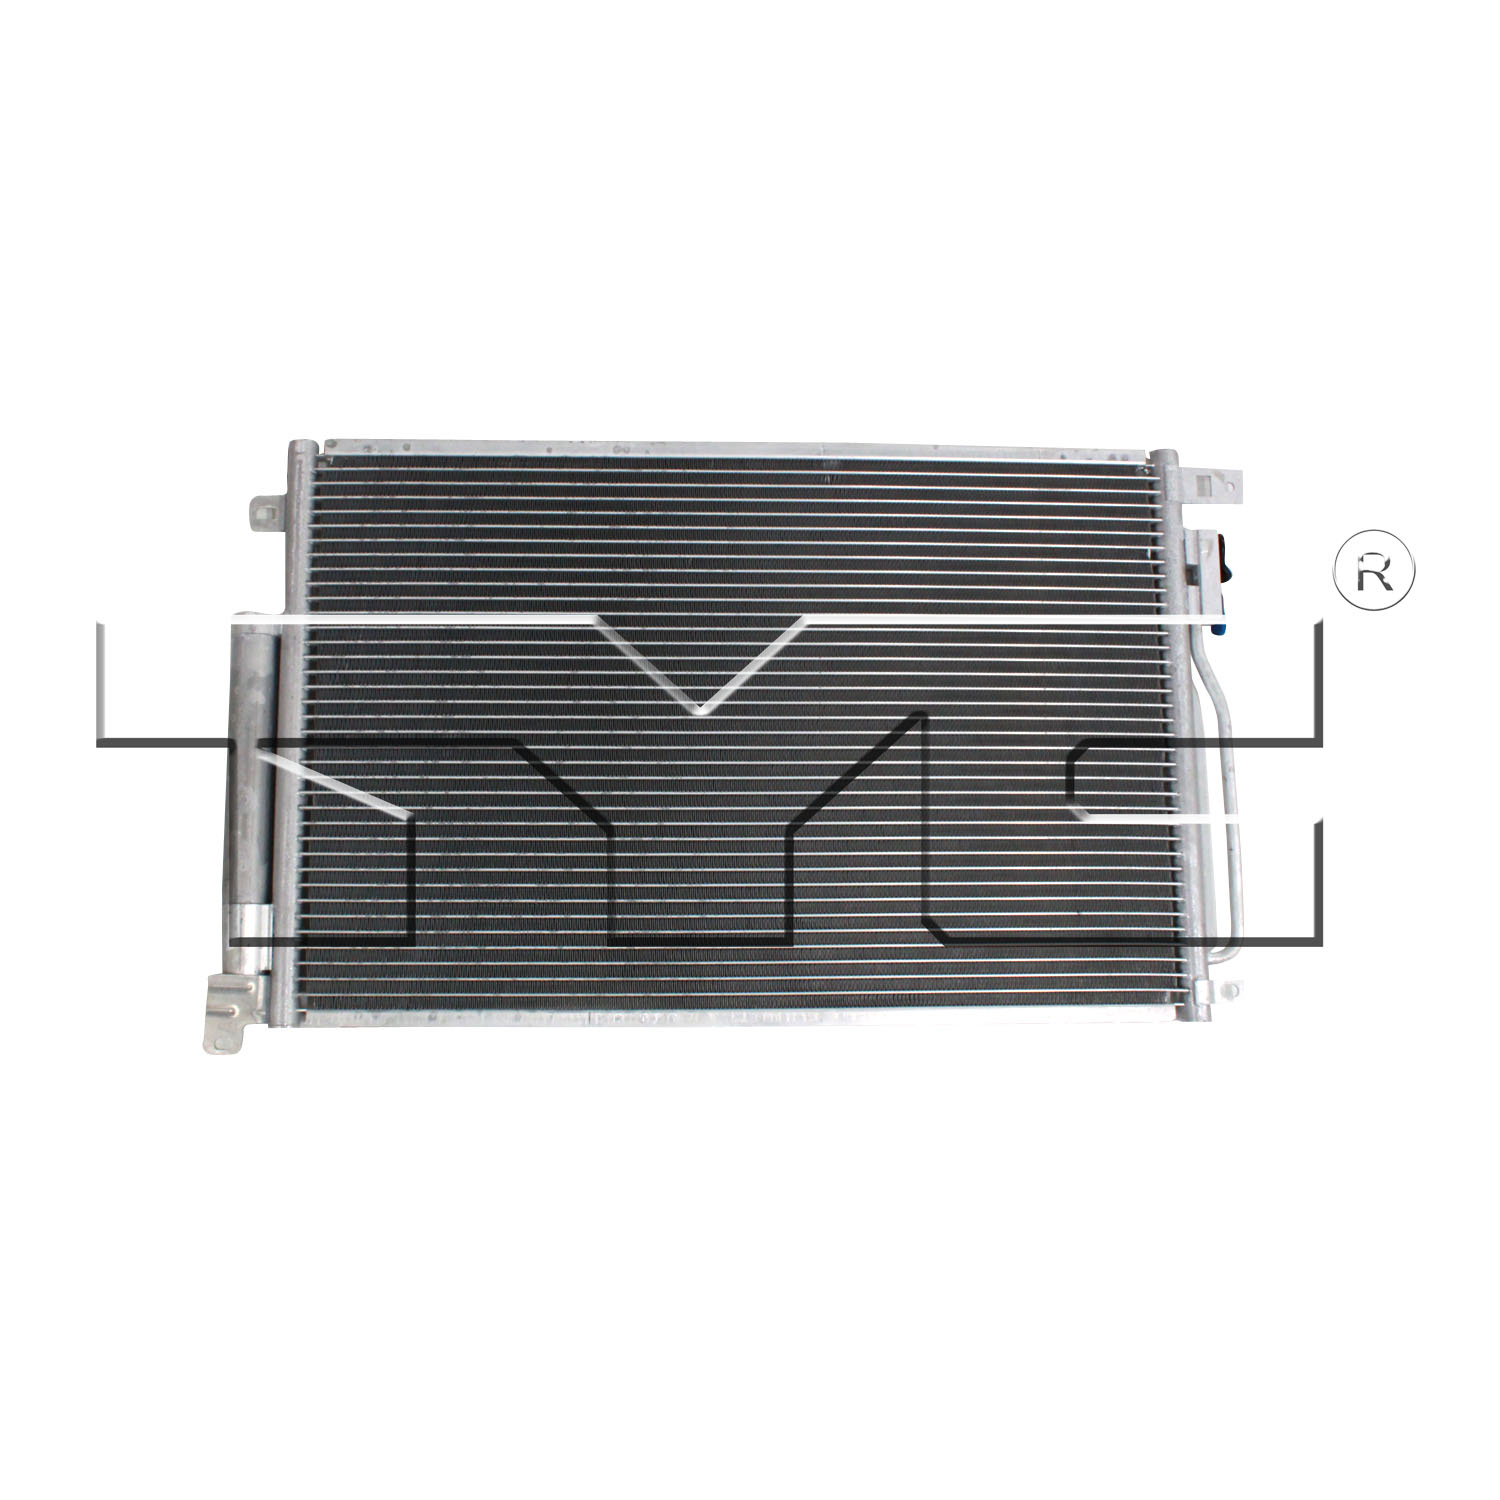 Aftermarket AC CONDENSERS for CHEVROLET - SONIC, SONIC,12-18,Air conditioning condenser